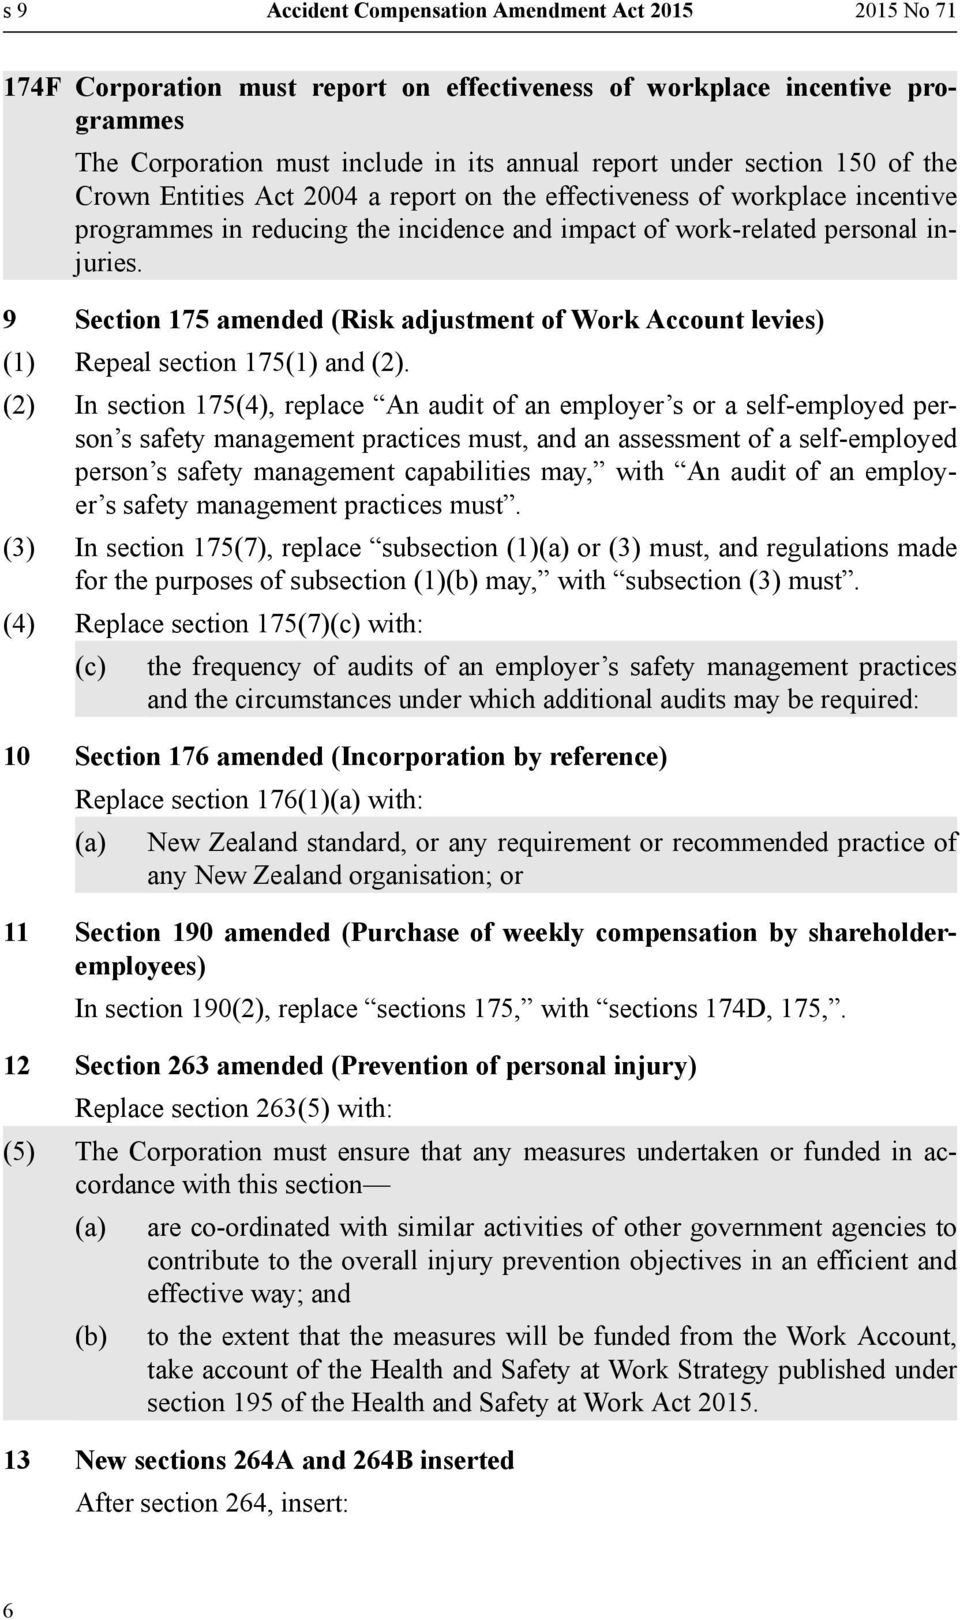 9 Section 175 amended (Risk adjustment of Work Account levies) (1) Repeal section 175(1) and (2).